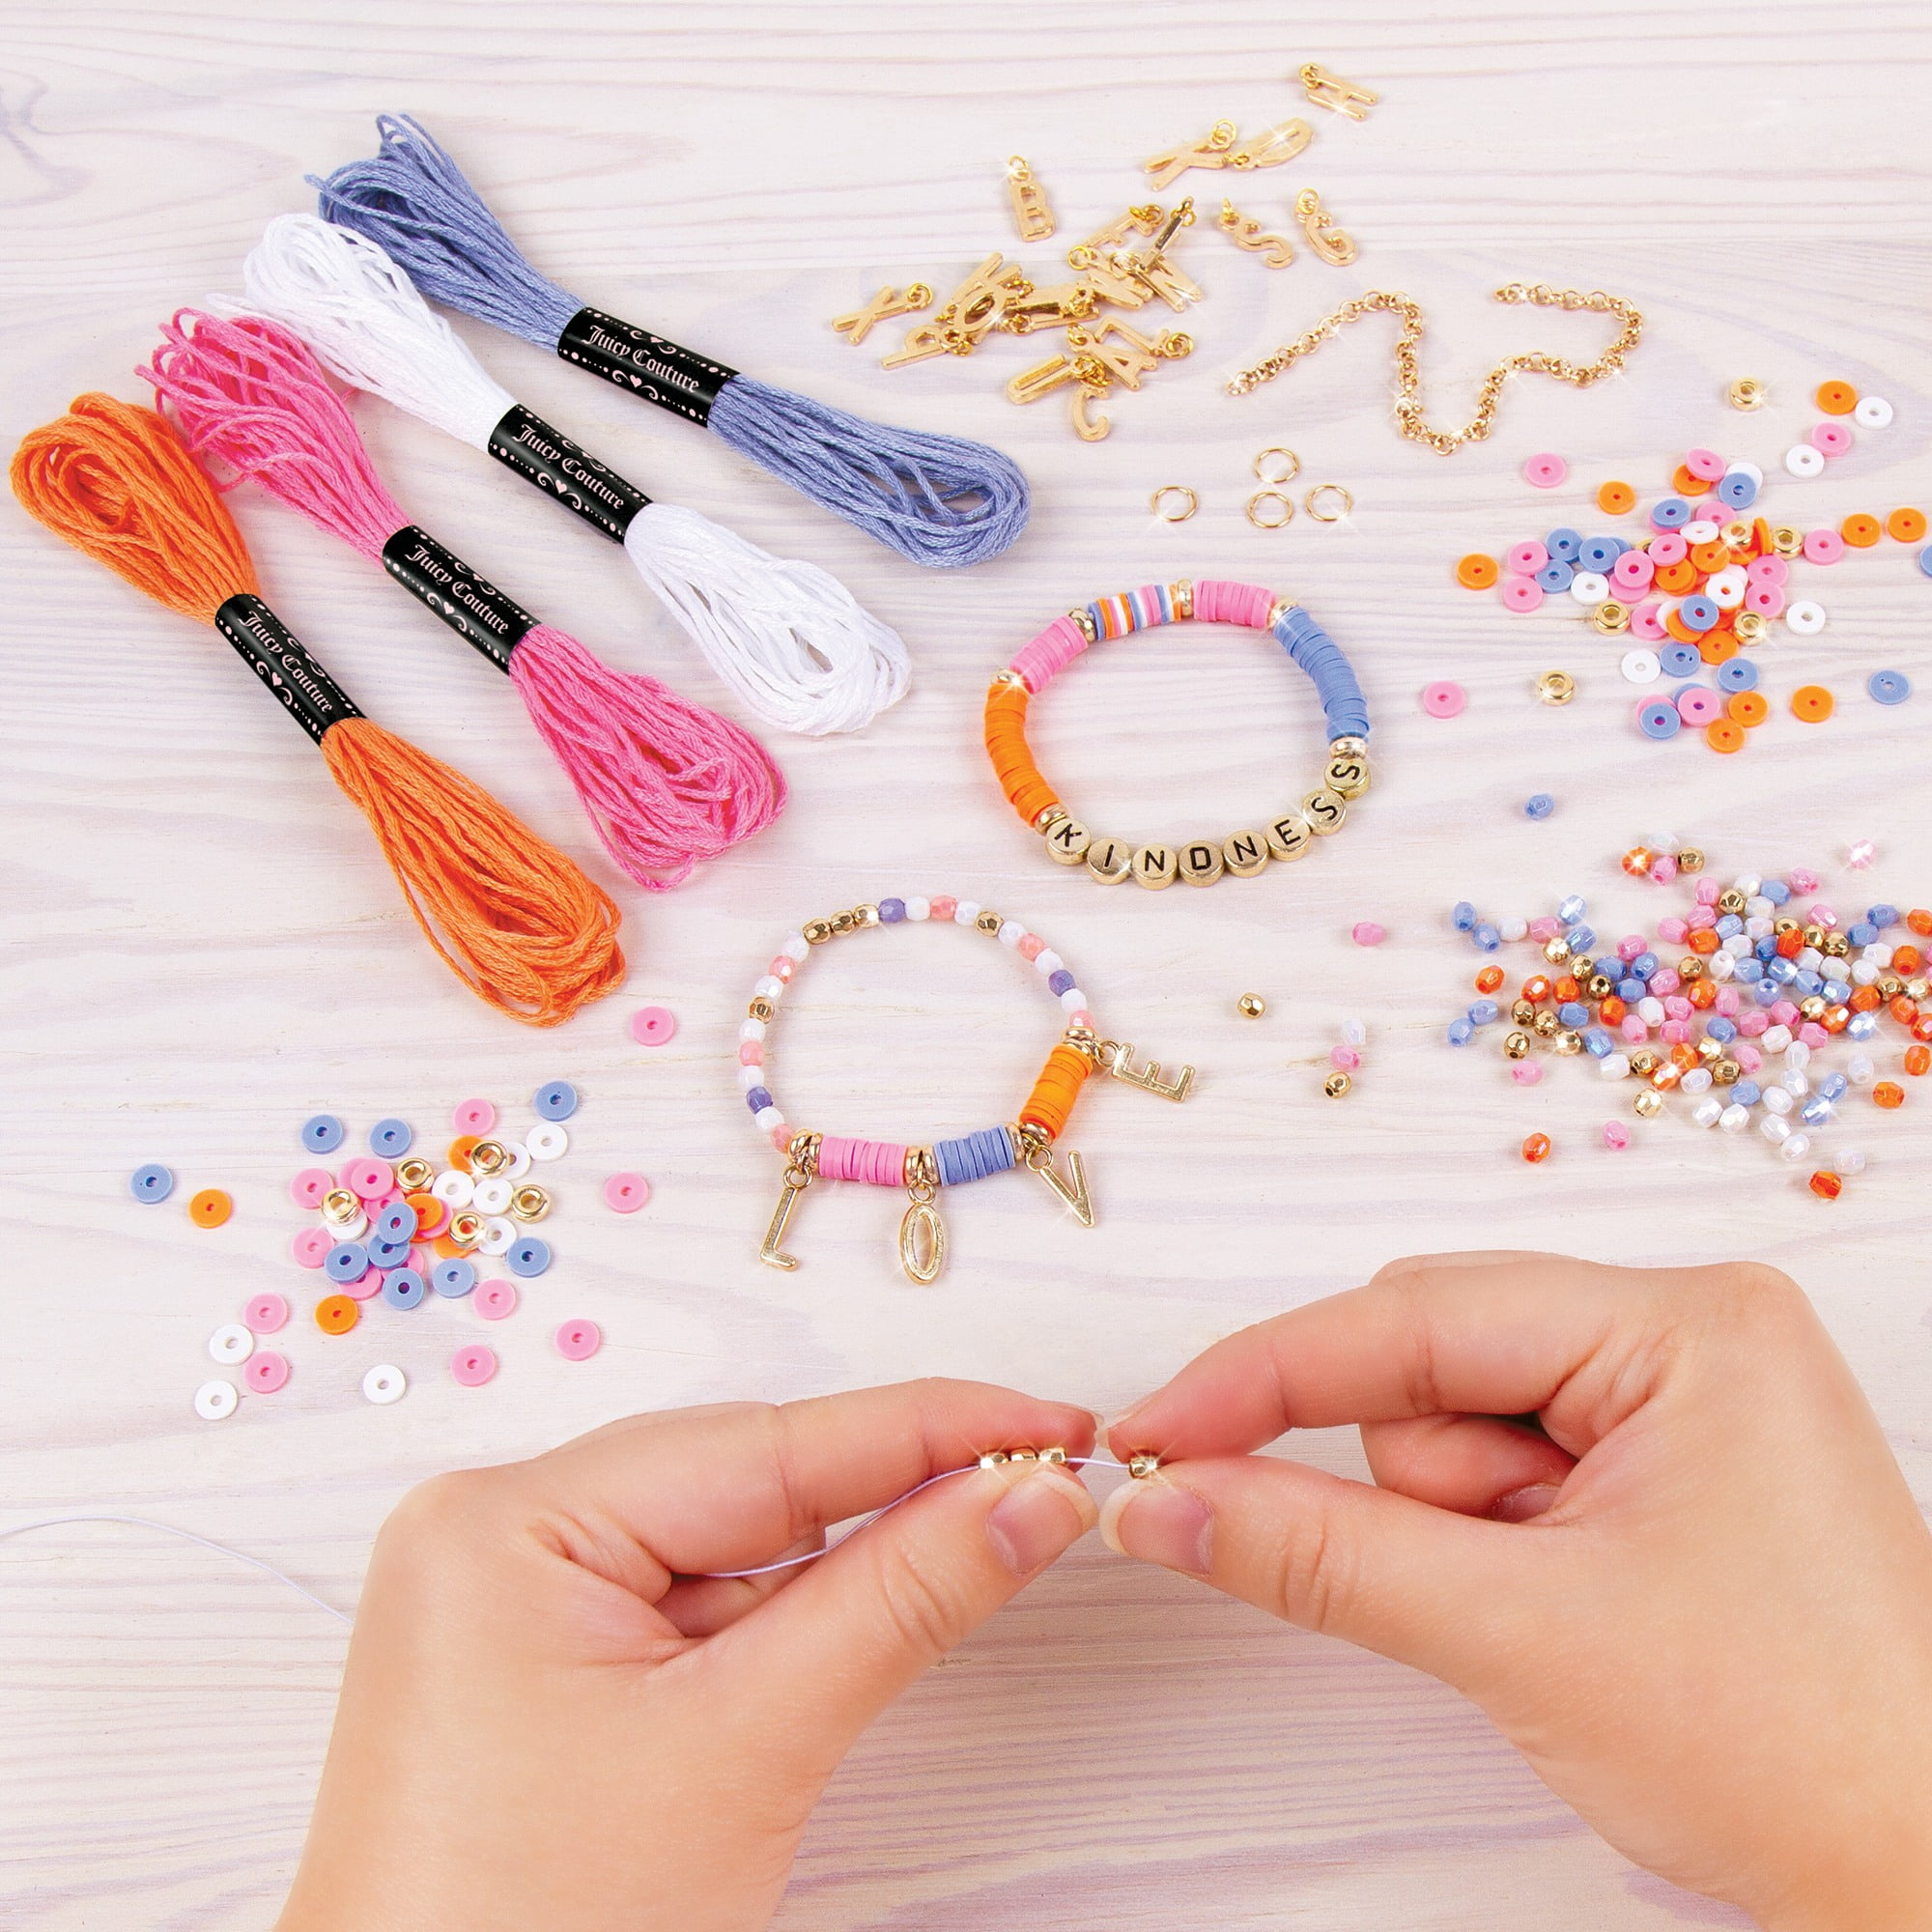  Make It Real - Juicy Couture Mini Chains and Charms - DIY Charm  Bracelet Making Kit - Friendship Bracelet Kit with Charms, Beads & Cords -  Arts & Crafts Bead Kit